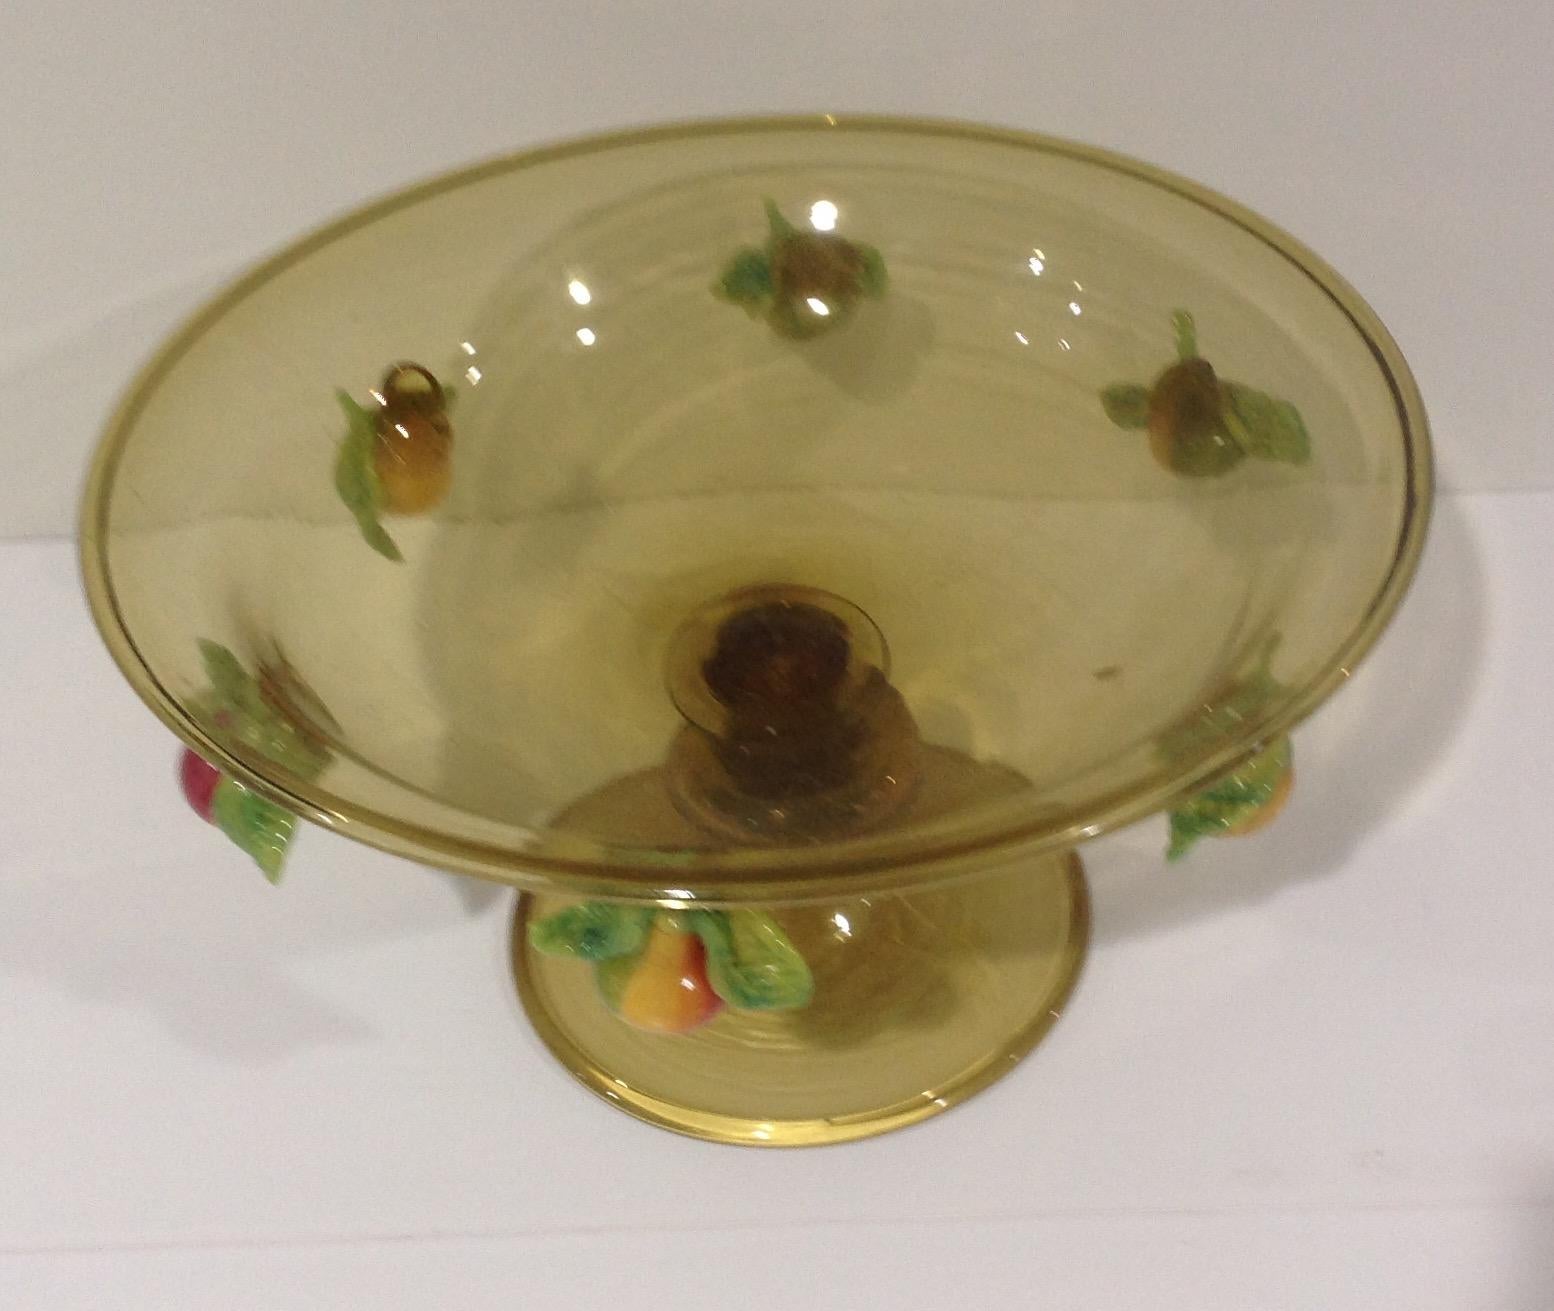 Large Murano glass bowl by Artisti Barovier with applied glass fruit.